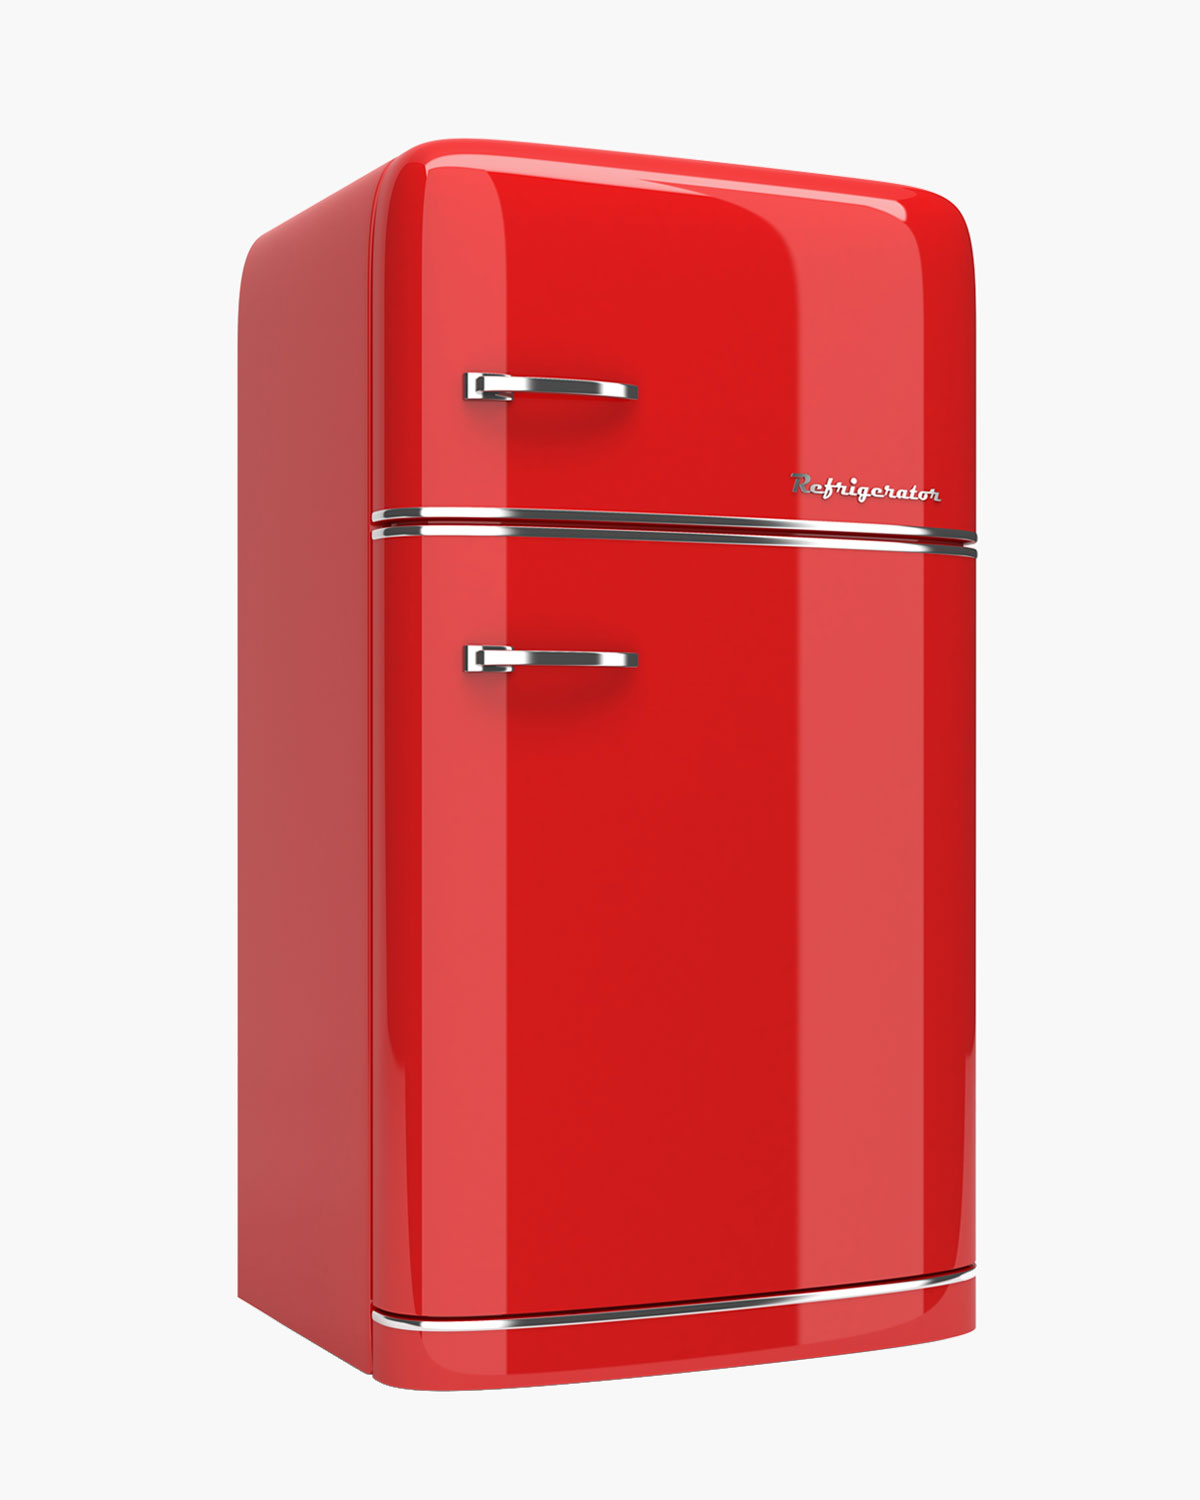 A red retro-style refrigerator for keeping our cold kitchen 100 recipes cool.